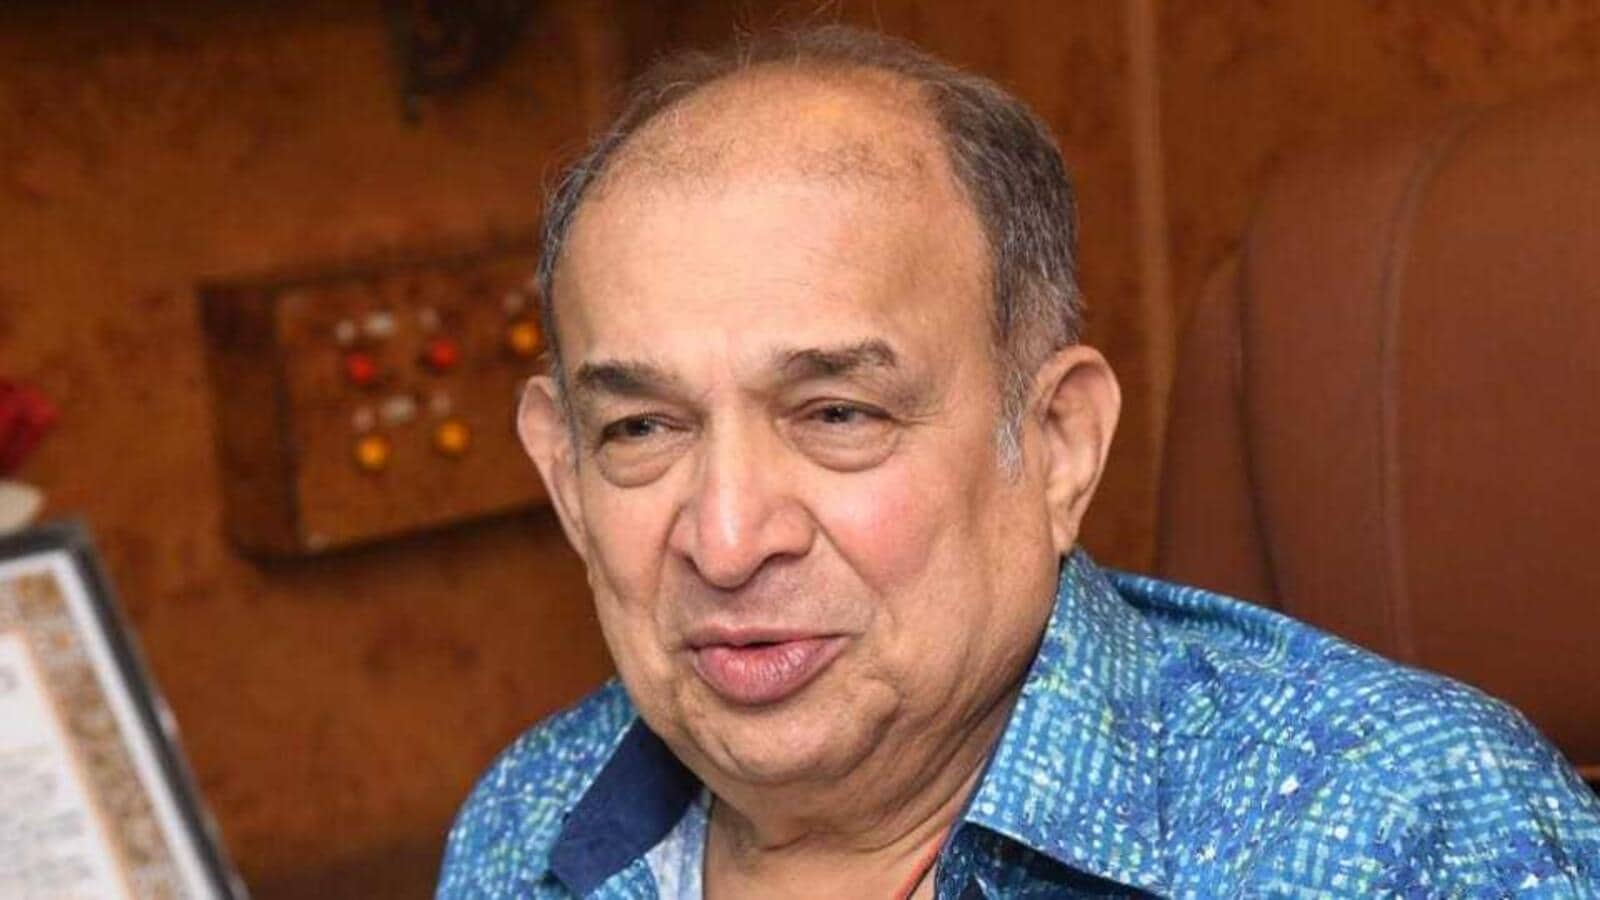 Mumbai theatre owner Manoj Desai: I will continue to slash the ticket prices to bring people back in theatres